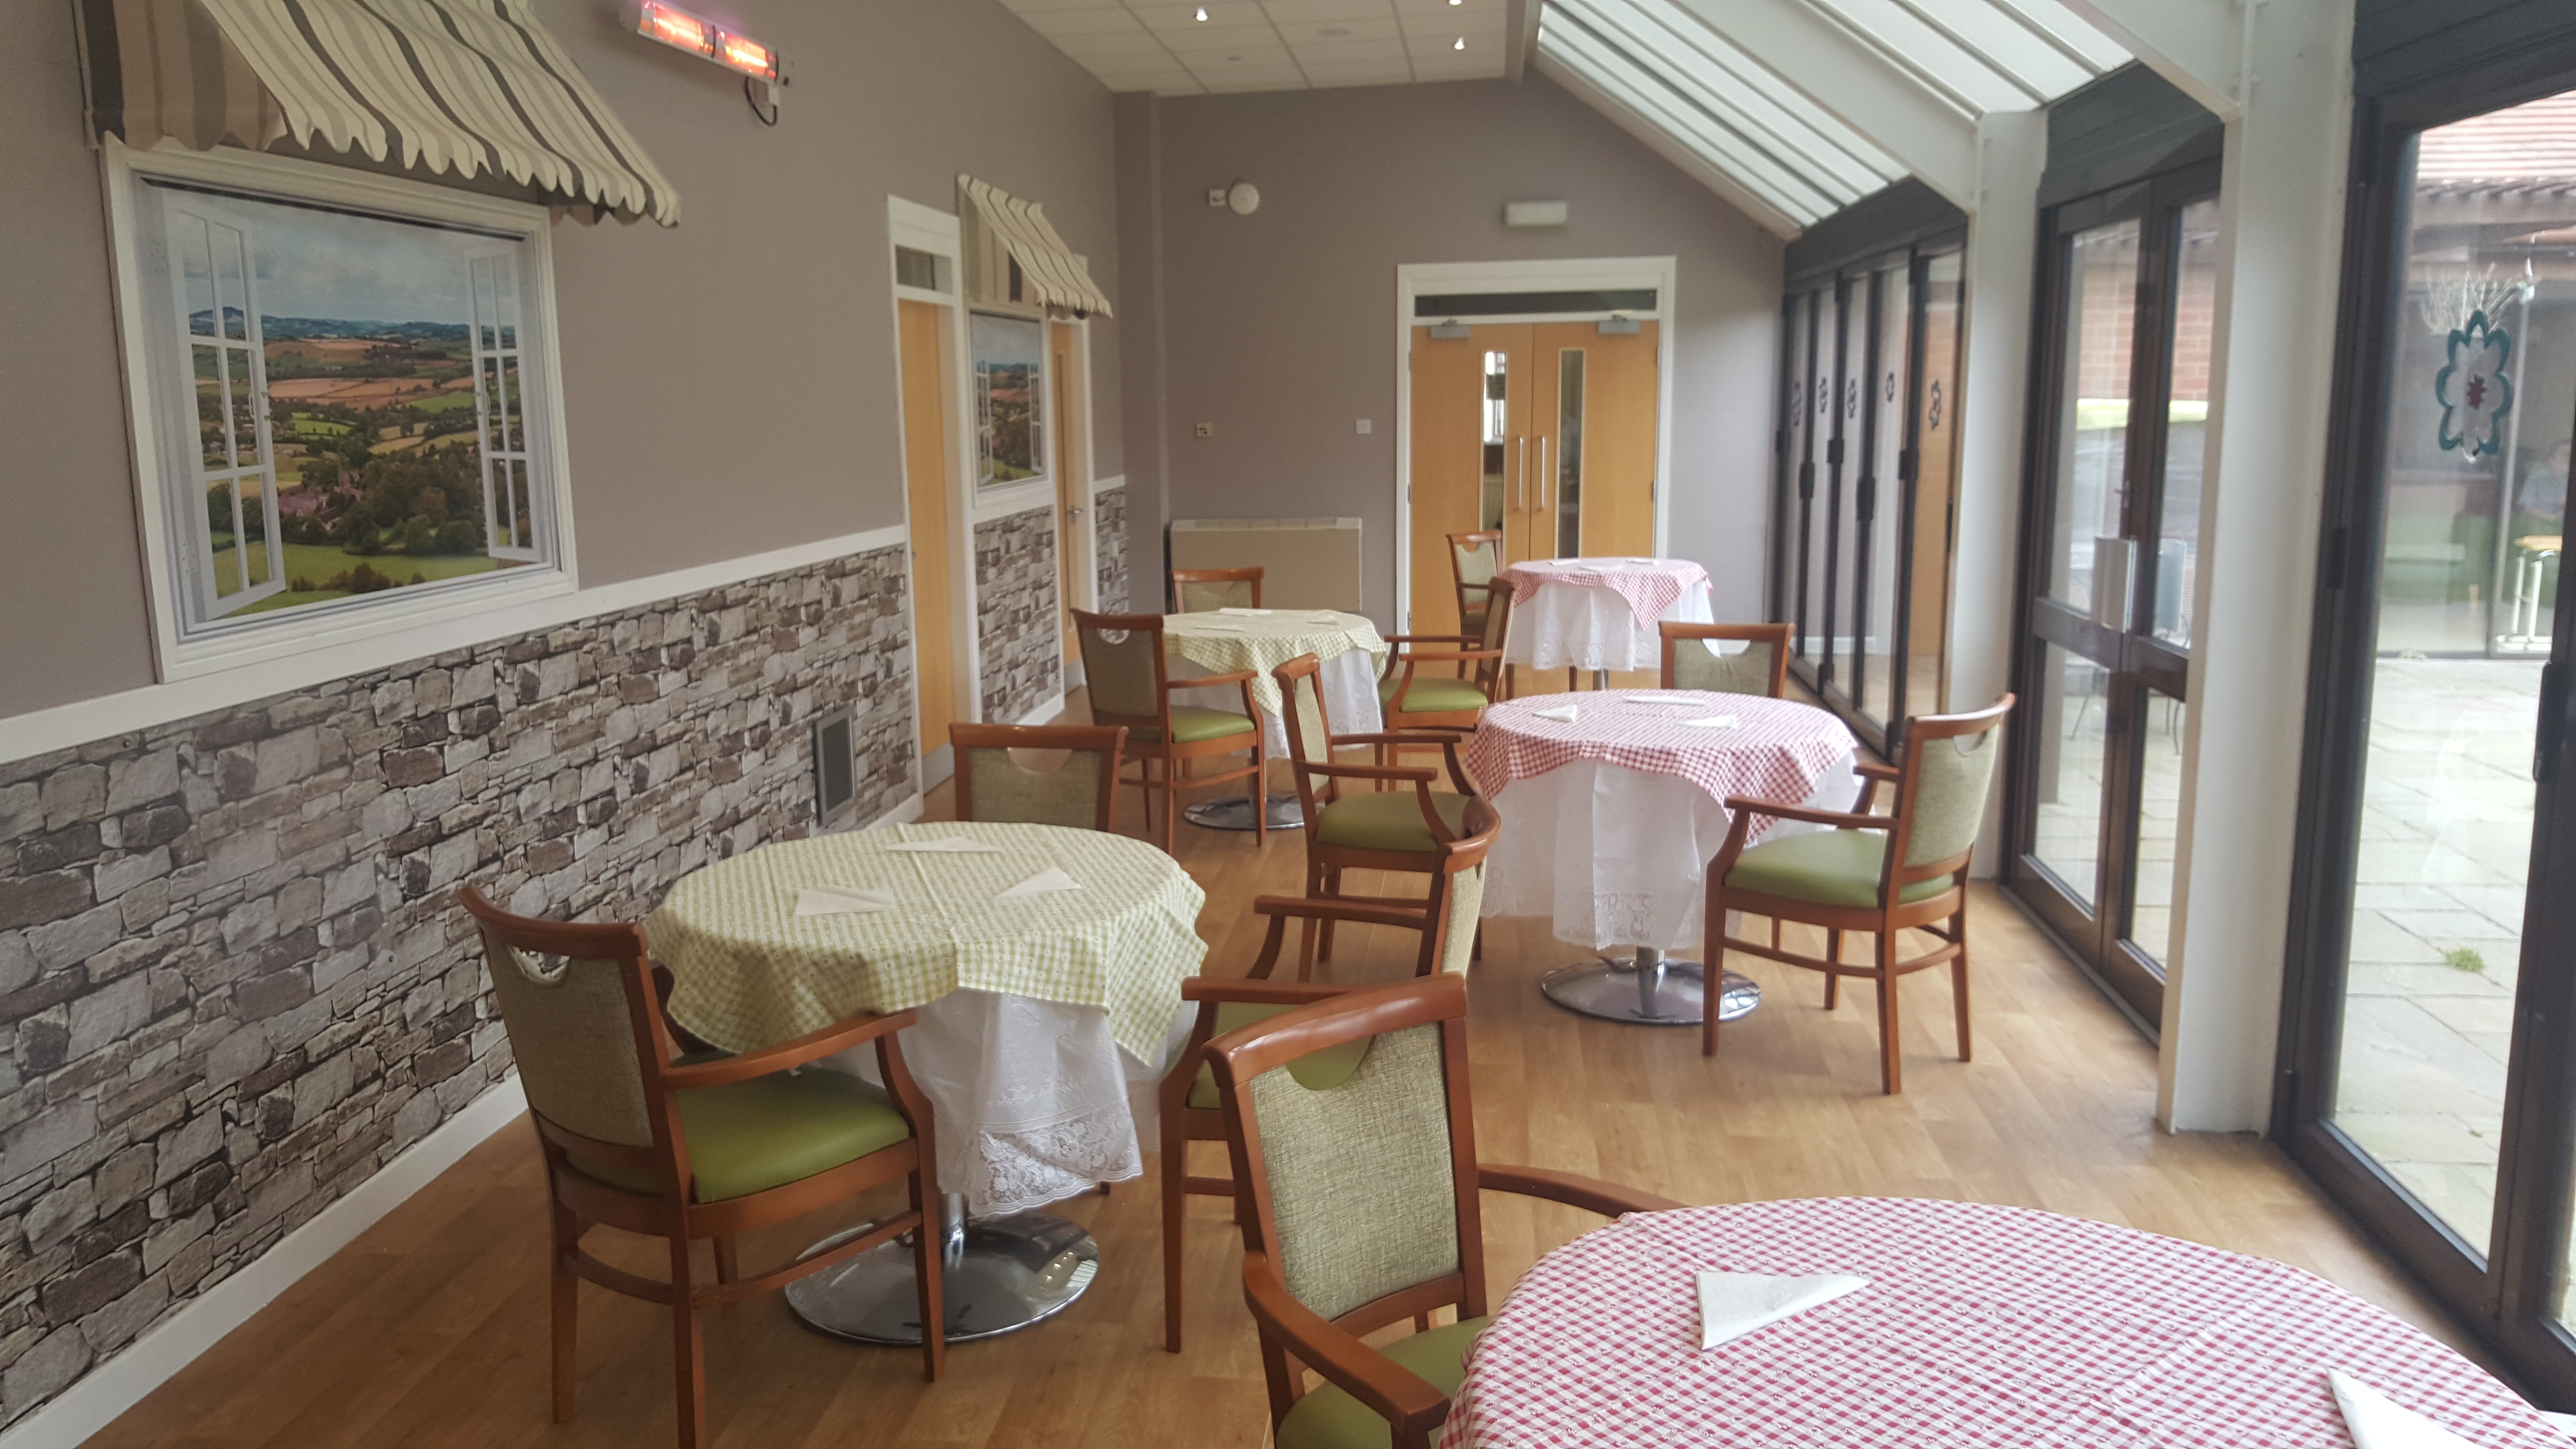 Makeover at Grace Court Care Centre, St Helens: Key Healthcare is dedicated to caring for elderly residents in safe. We have multiple dementia care homes including our care home middlesbrough, our care home St. Helen and care home saltburn. We excel in monitoring and improving care levels.